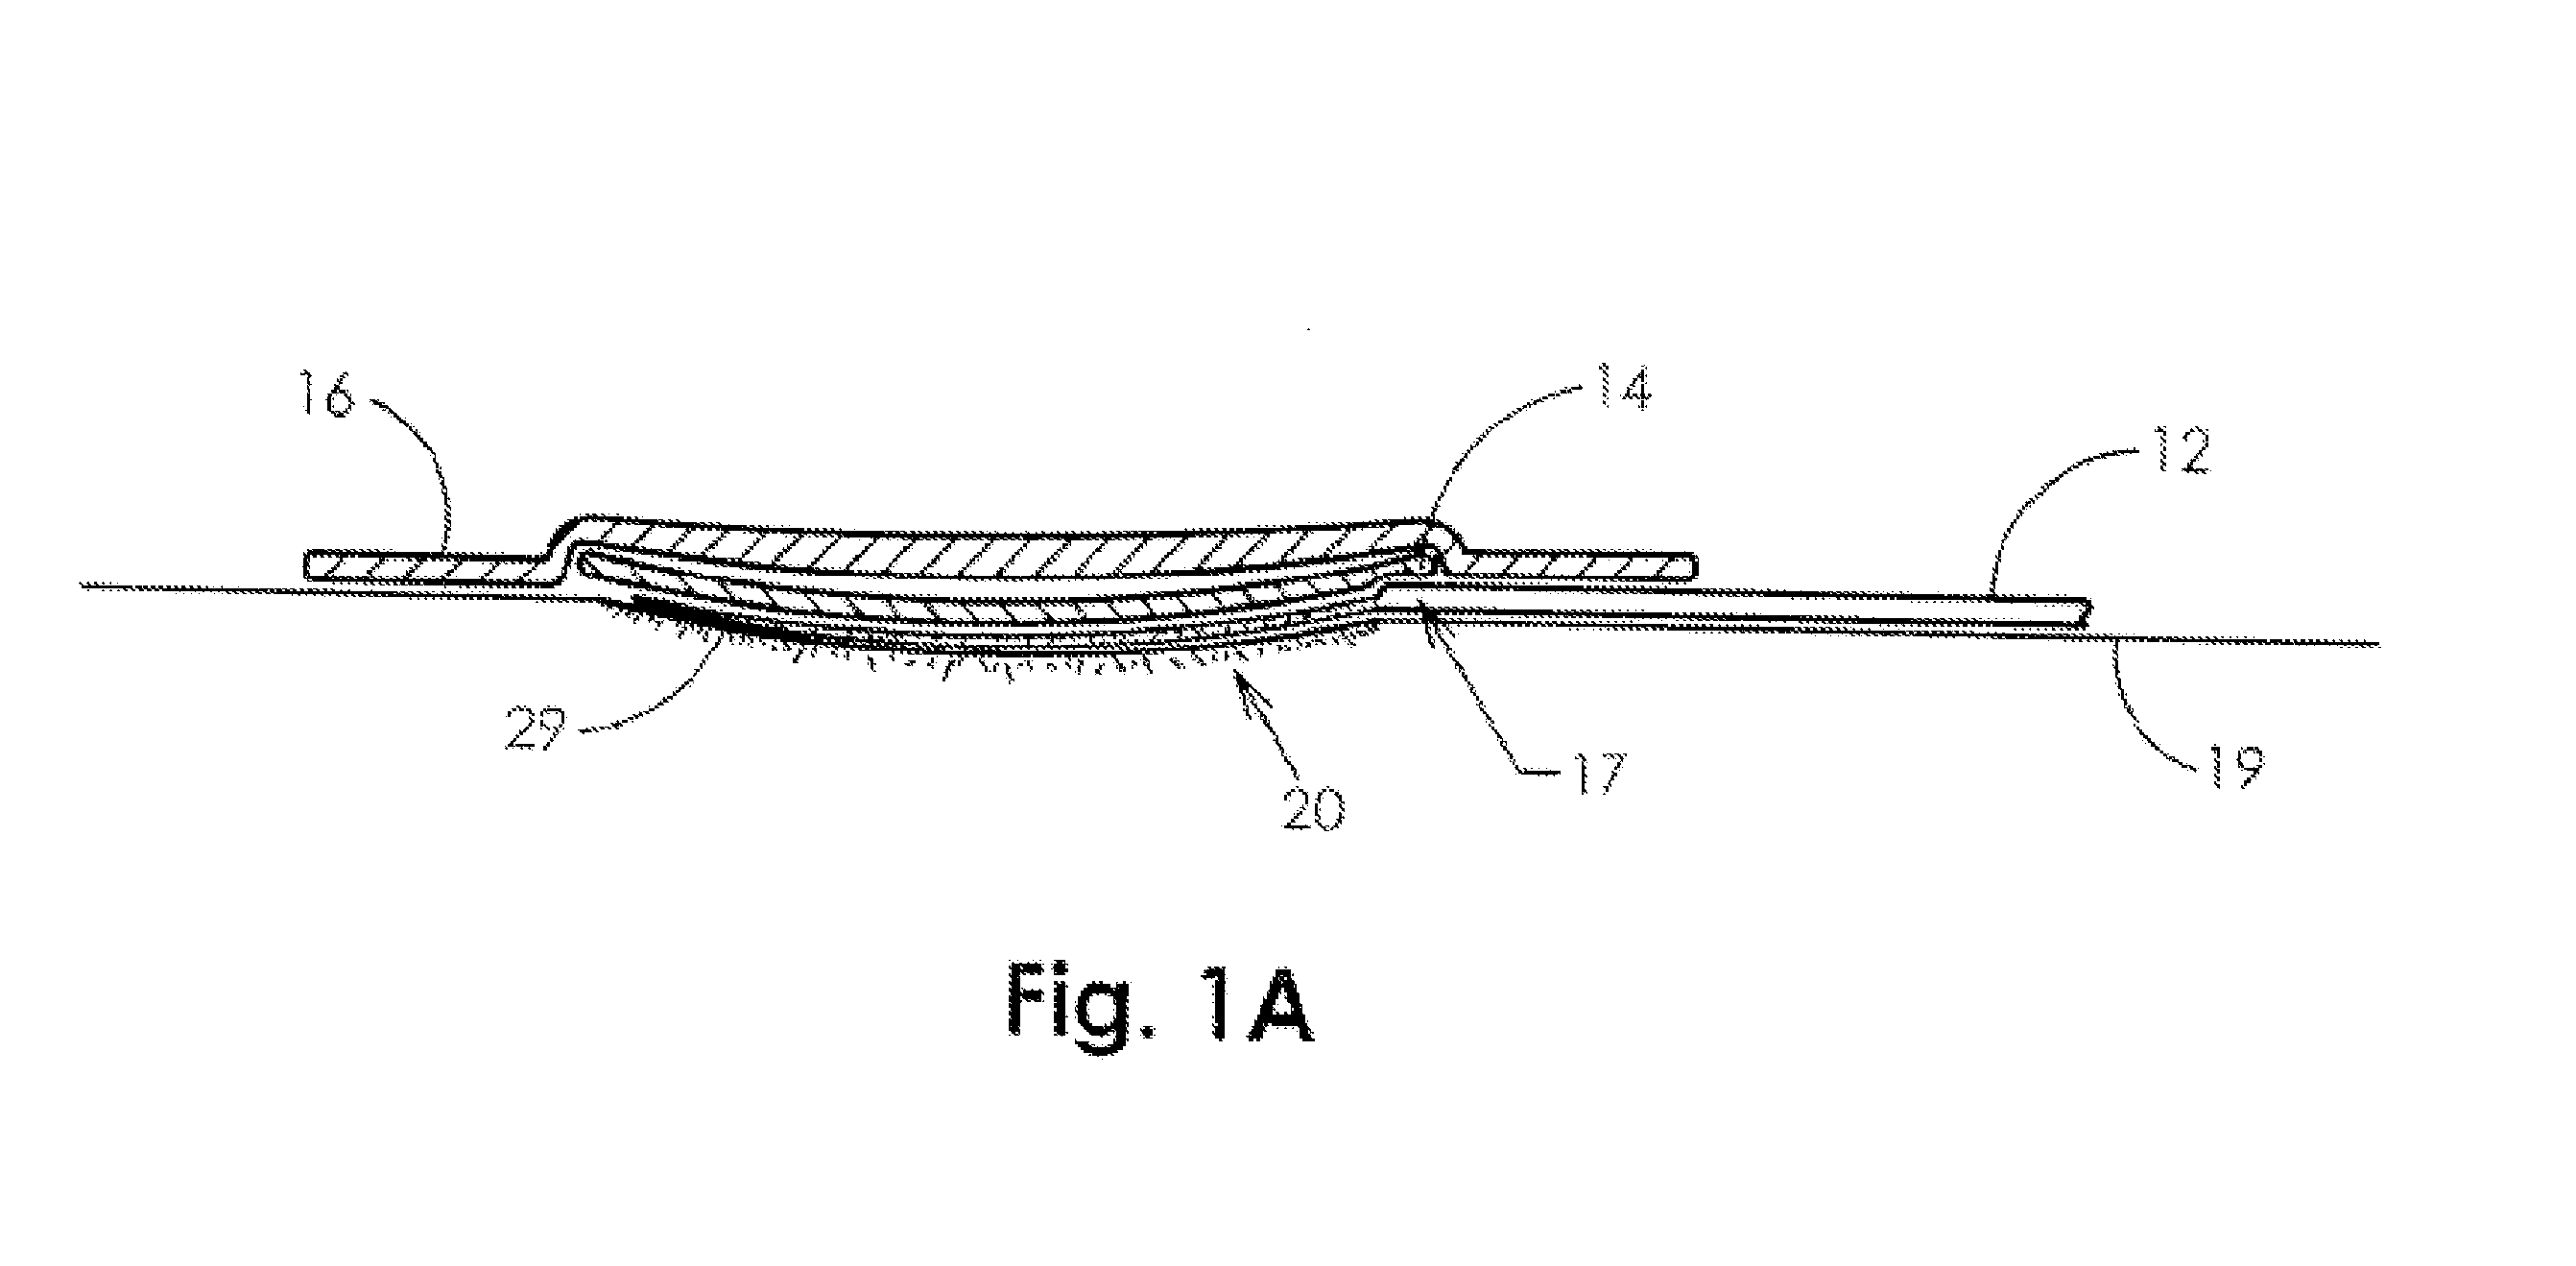 Apparatus and methods for controlling tissue oxygenation for wound healing and promoting tissue viability